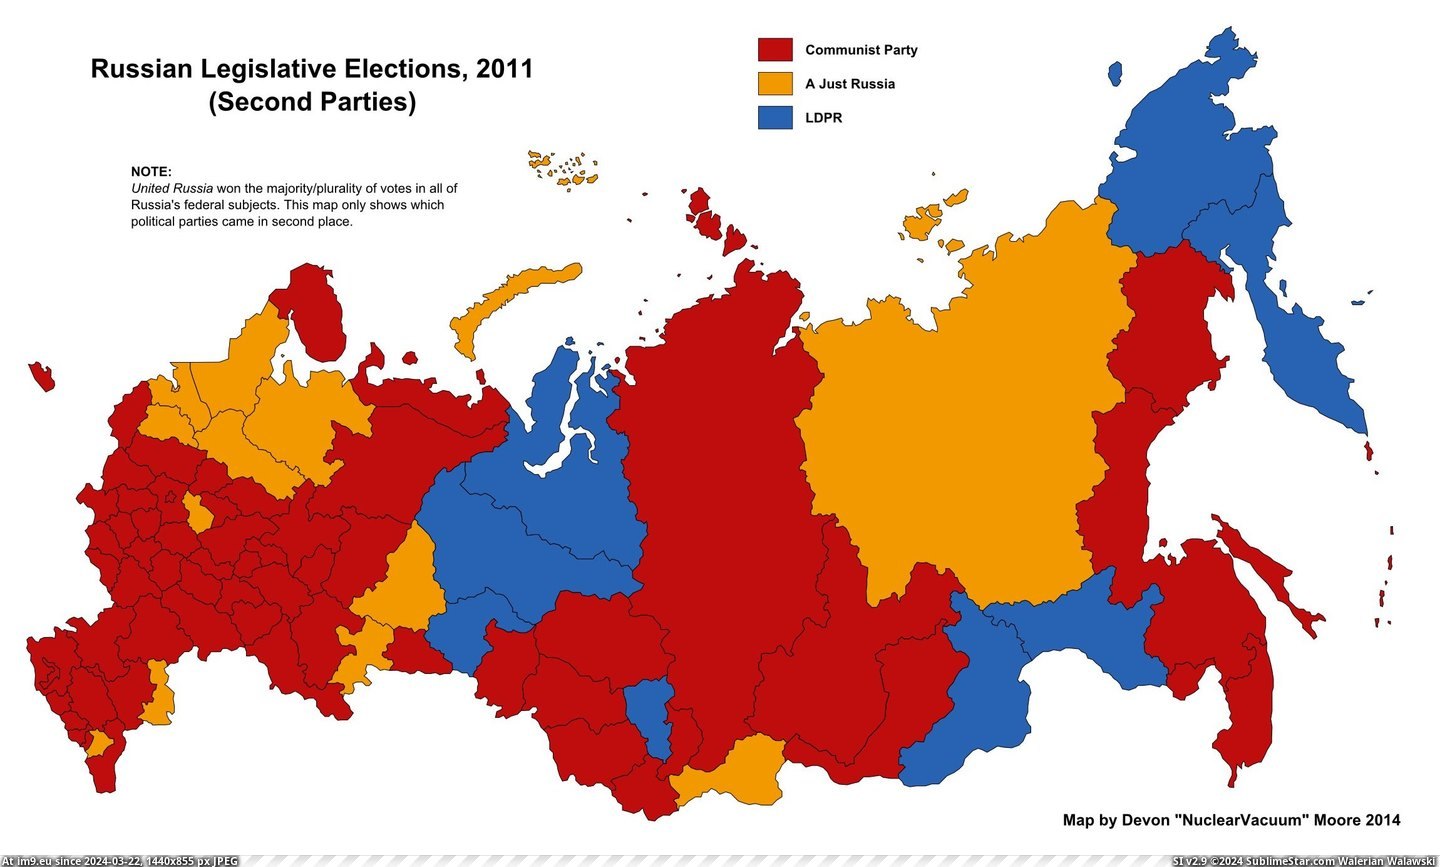 #Place #Russian #Parties #Legislative #Election #Notes [Mapporn] Second Place Parties in the 2011 Russian Legislative Election (Notes in Comments) [OC] [2300x1377] Pic. (Bild von album My r/MAPS favs))